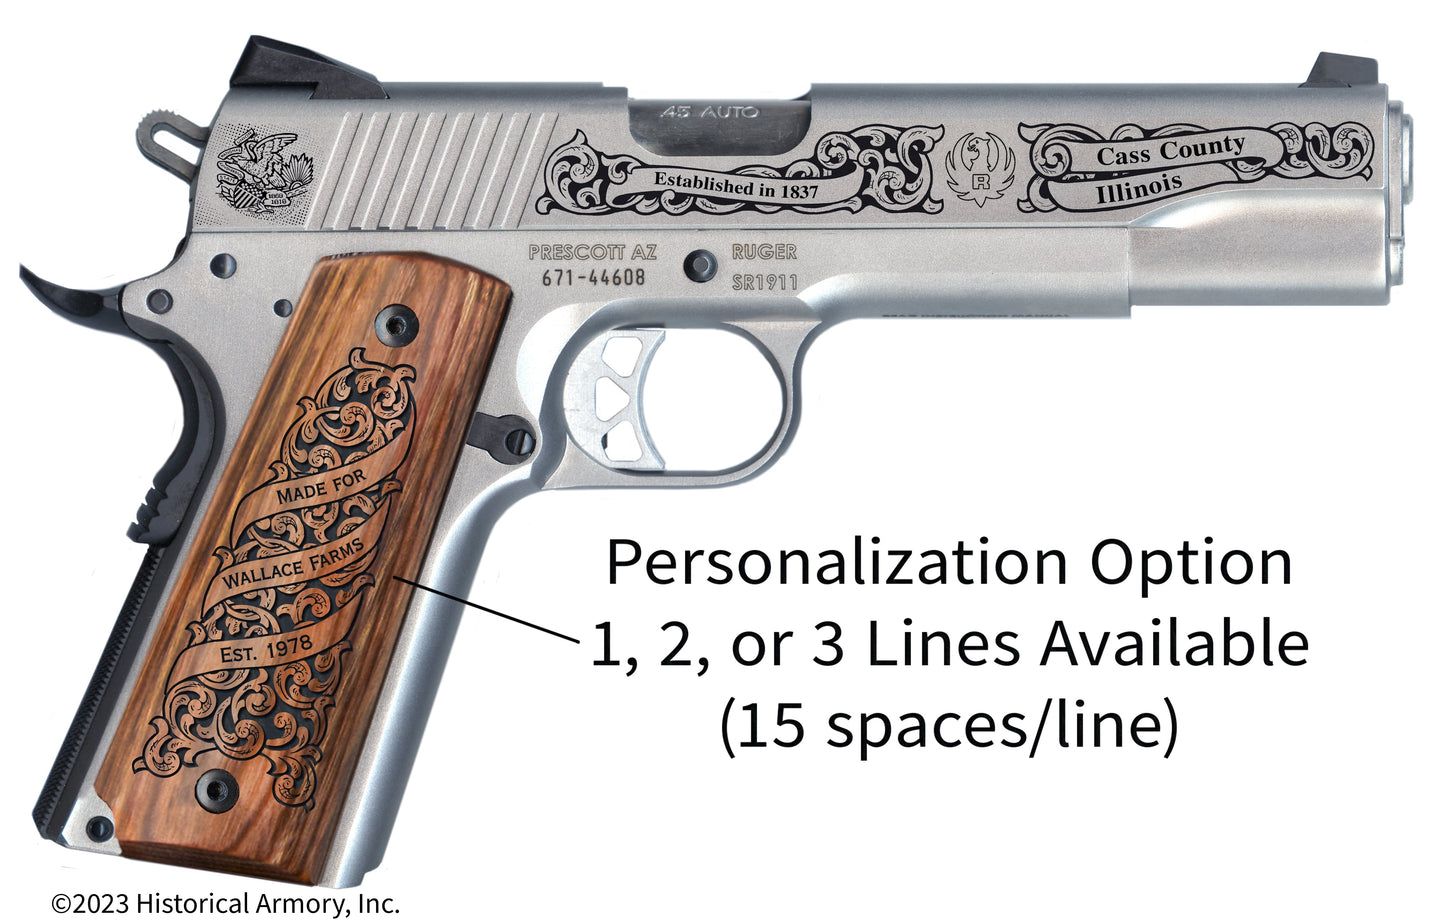 Cass County Illinois Personalized Engraved .45 Auto Ruger 1911